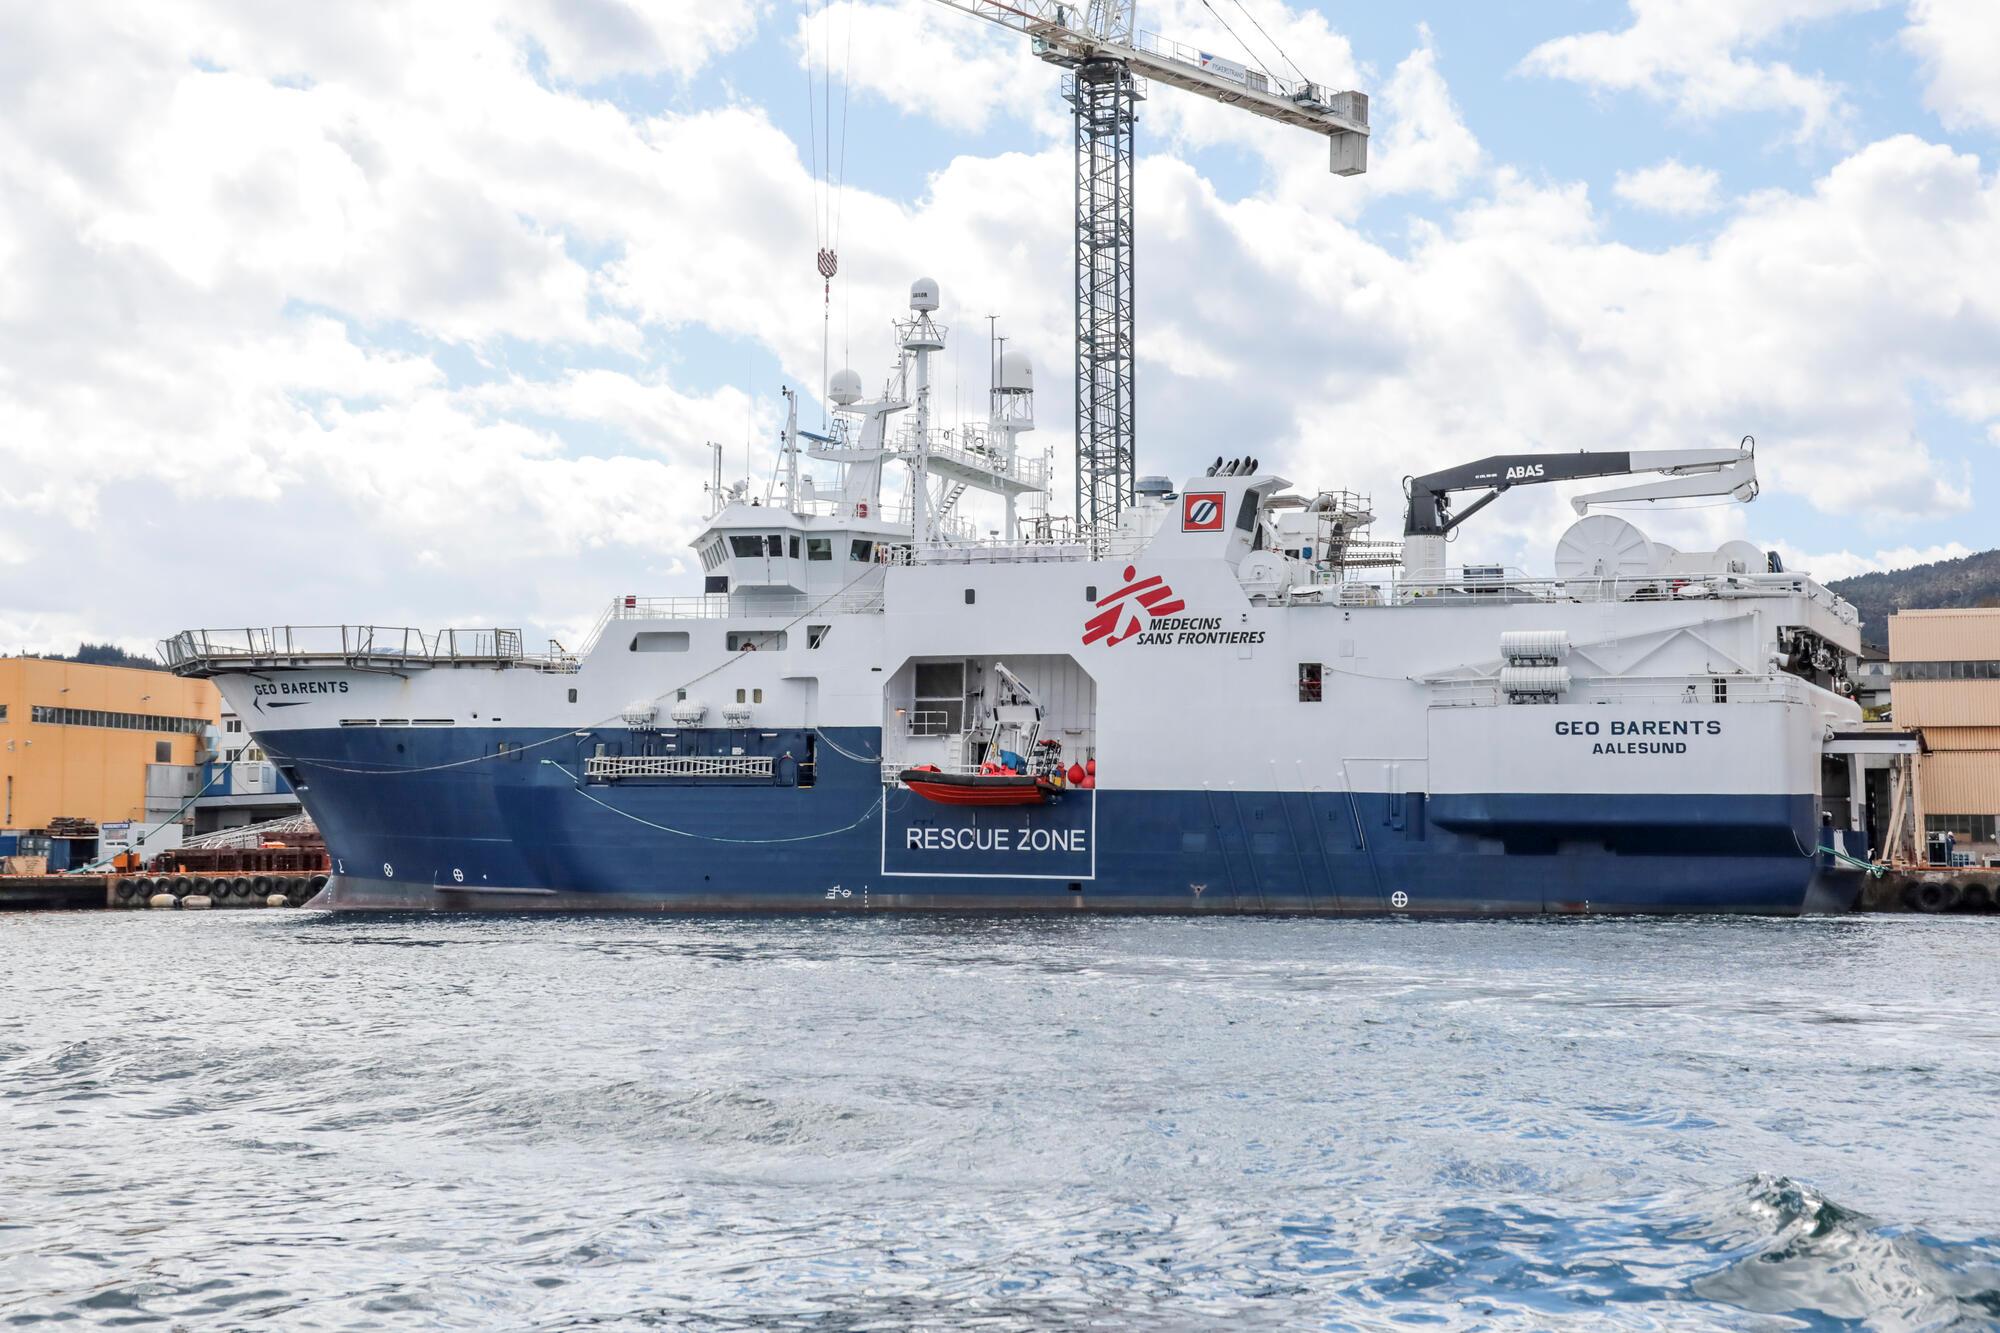 MSF search and rescue ship Geo Barents